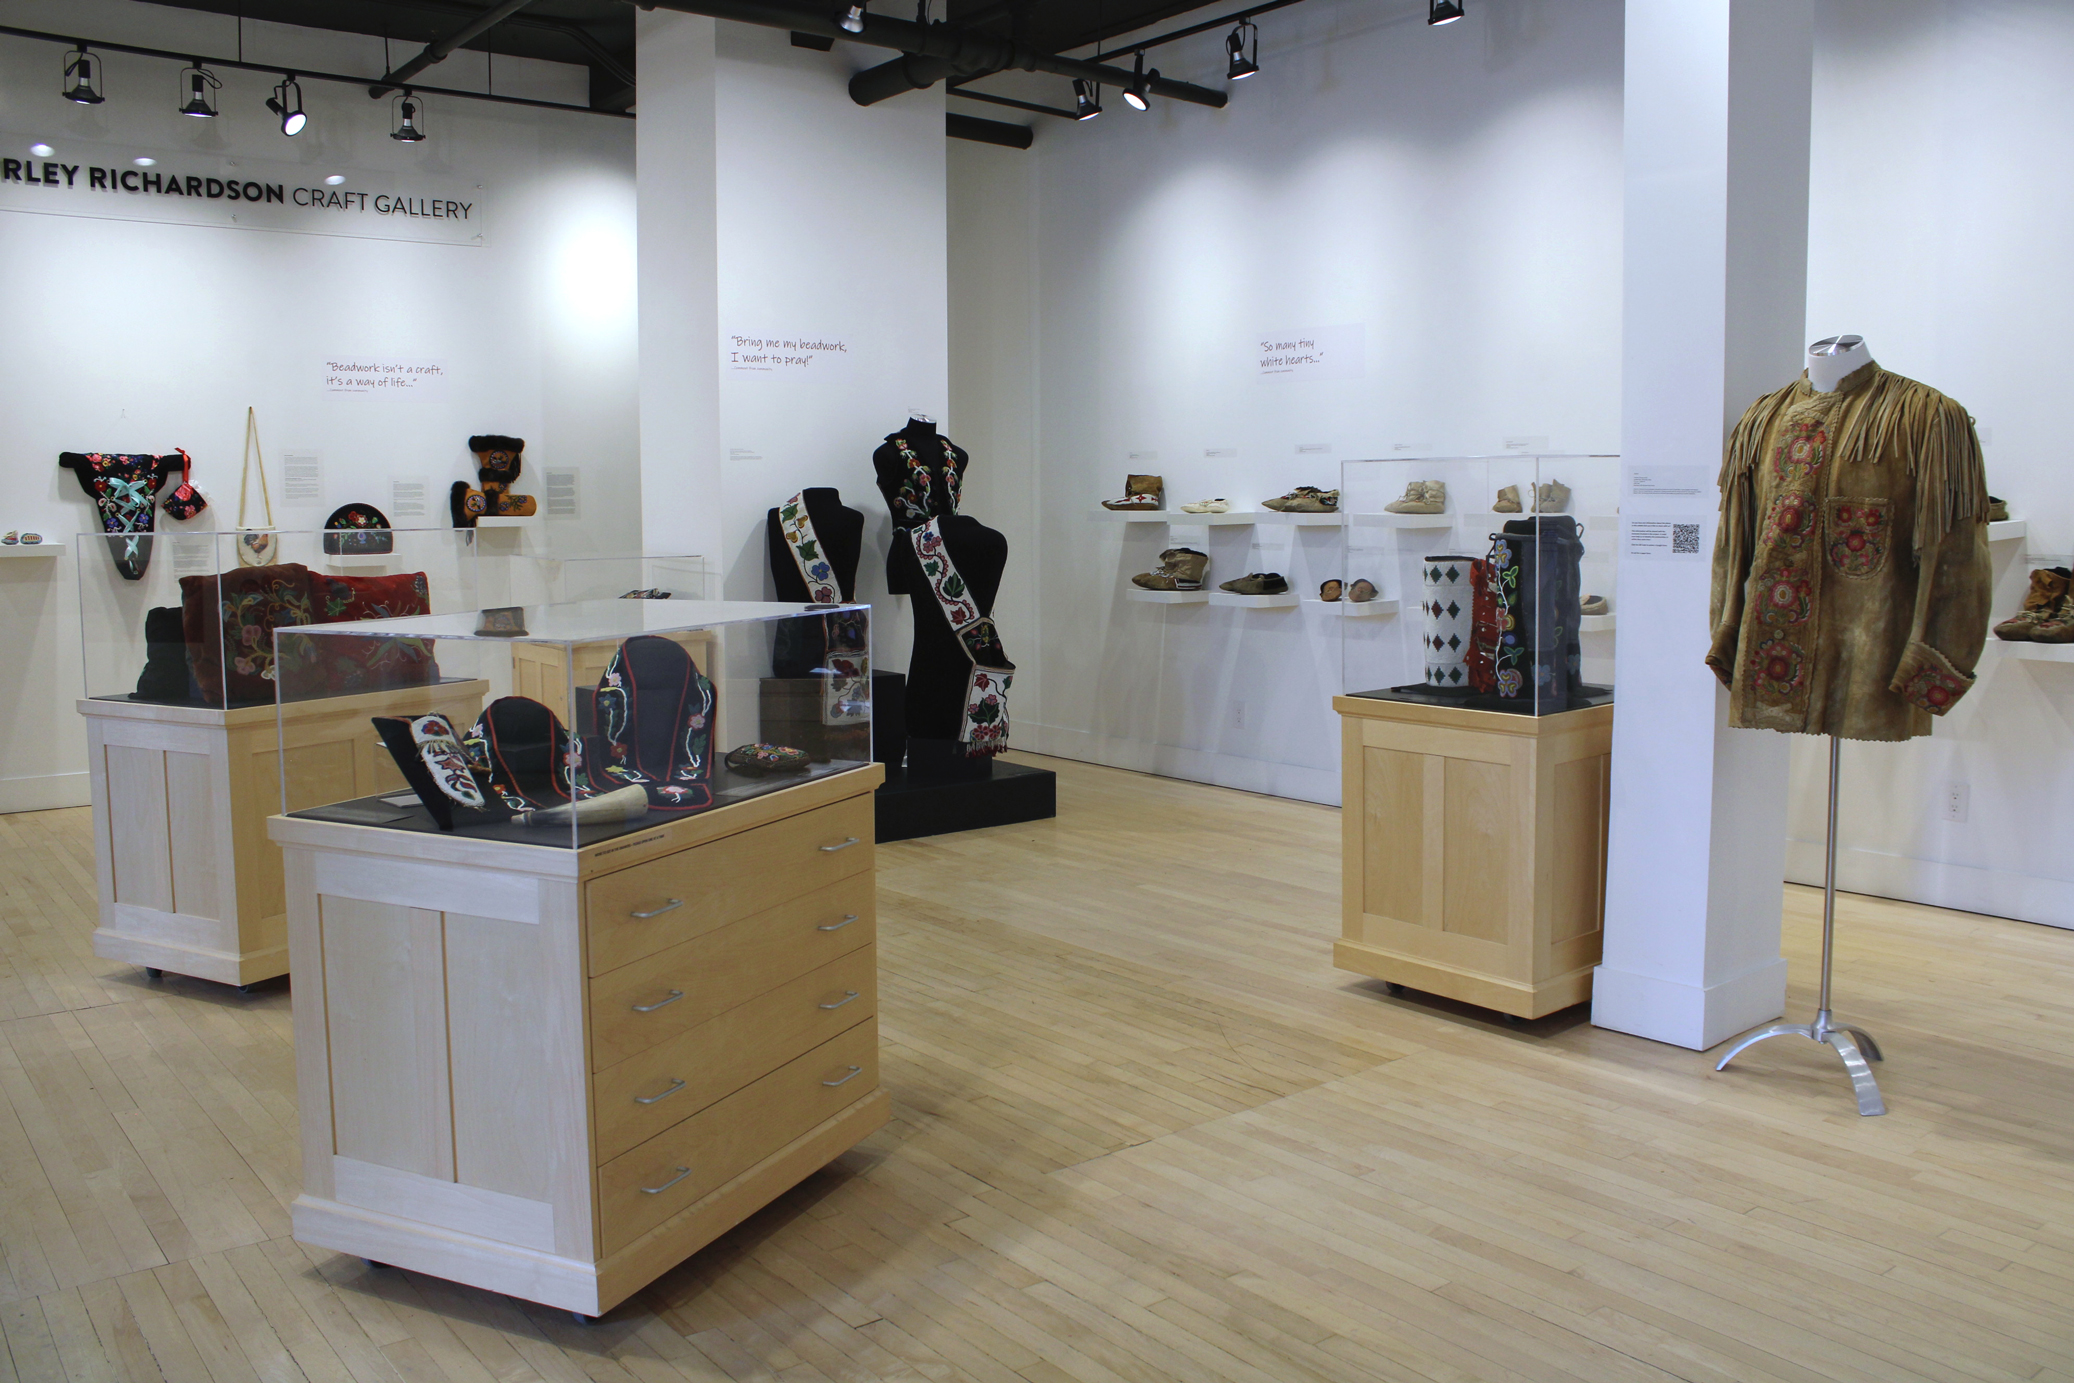 Gathering exhibit in the C2 Centre for Craft exhibition space,